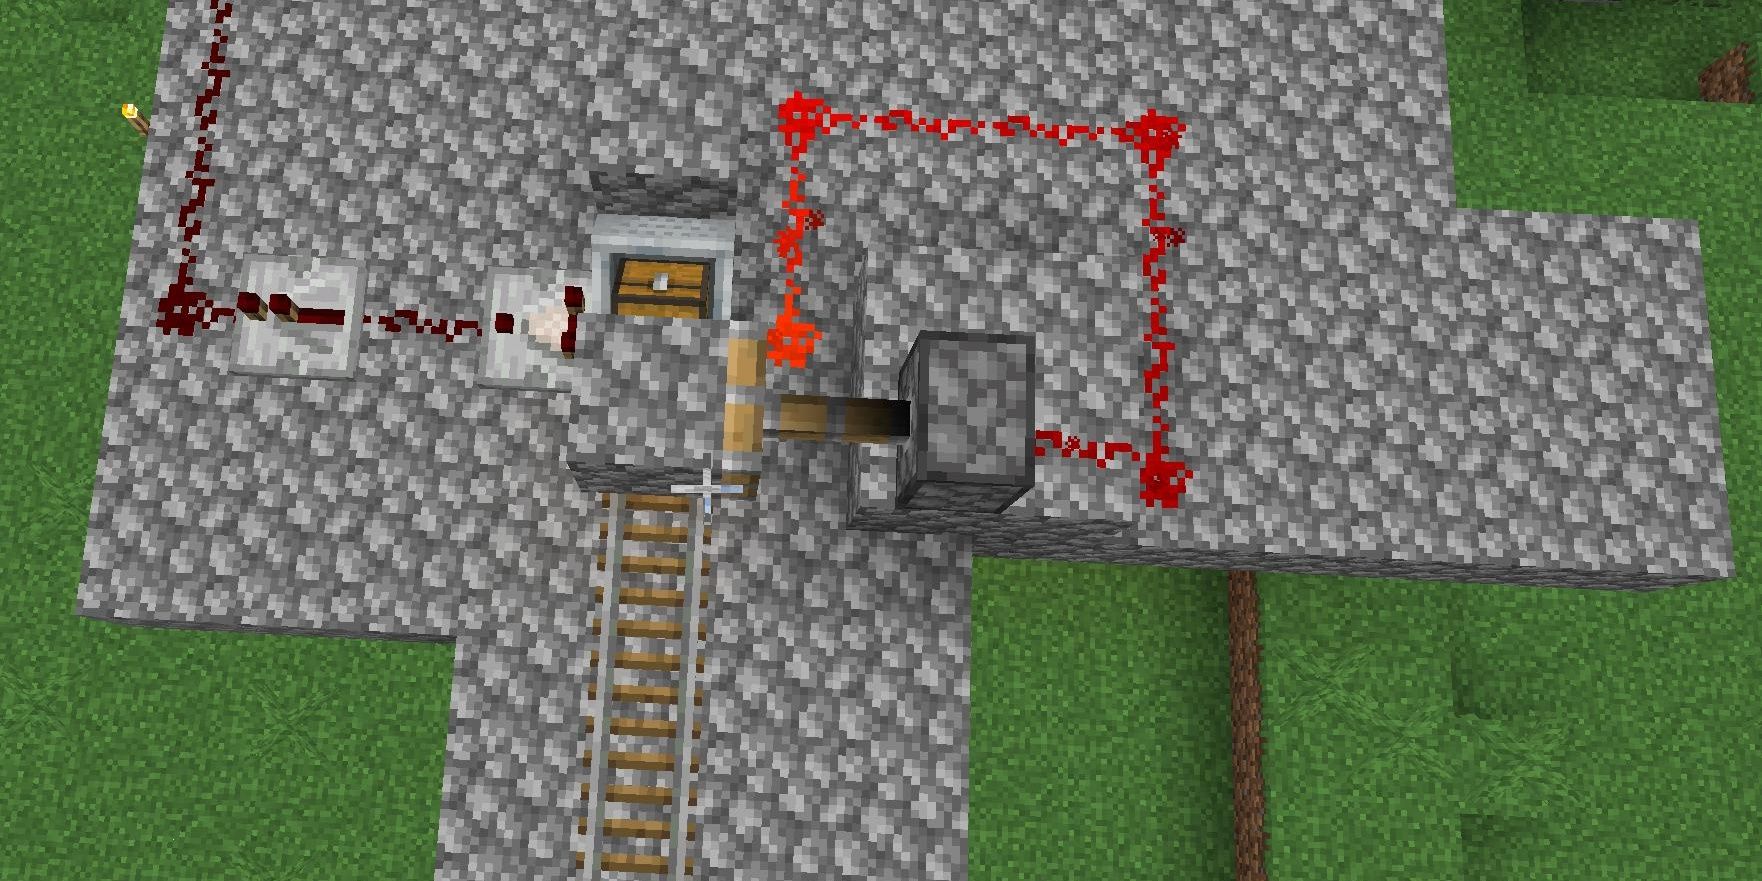 Overhead of a Minecraft Redstone Circuit. Image credit: gaming.stackexchange.com